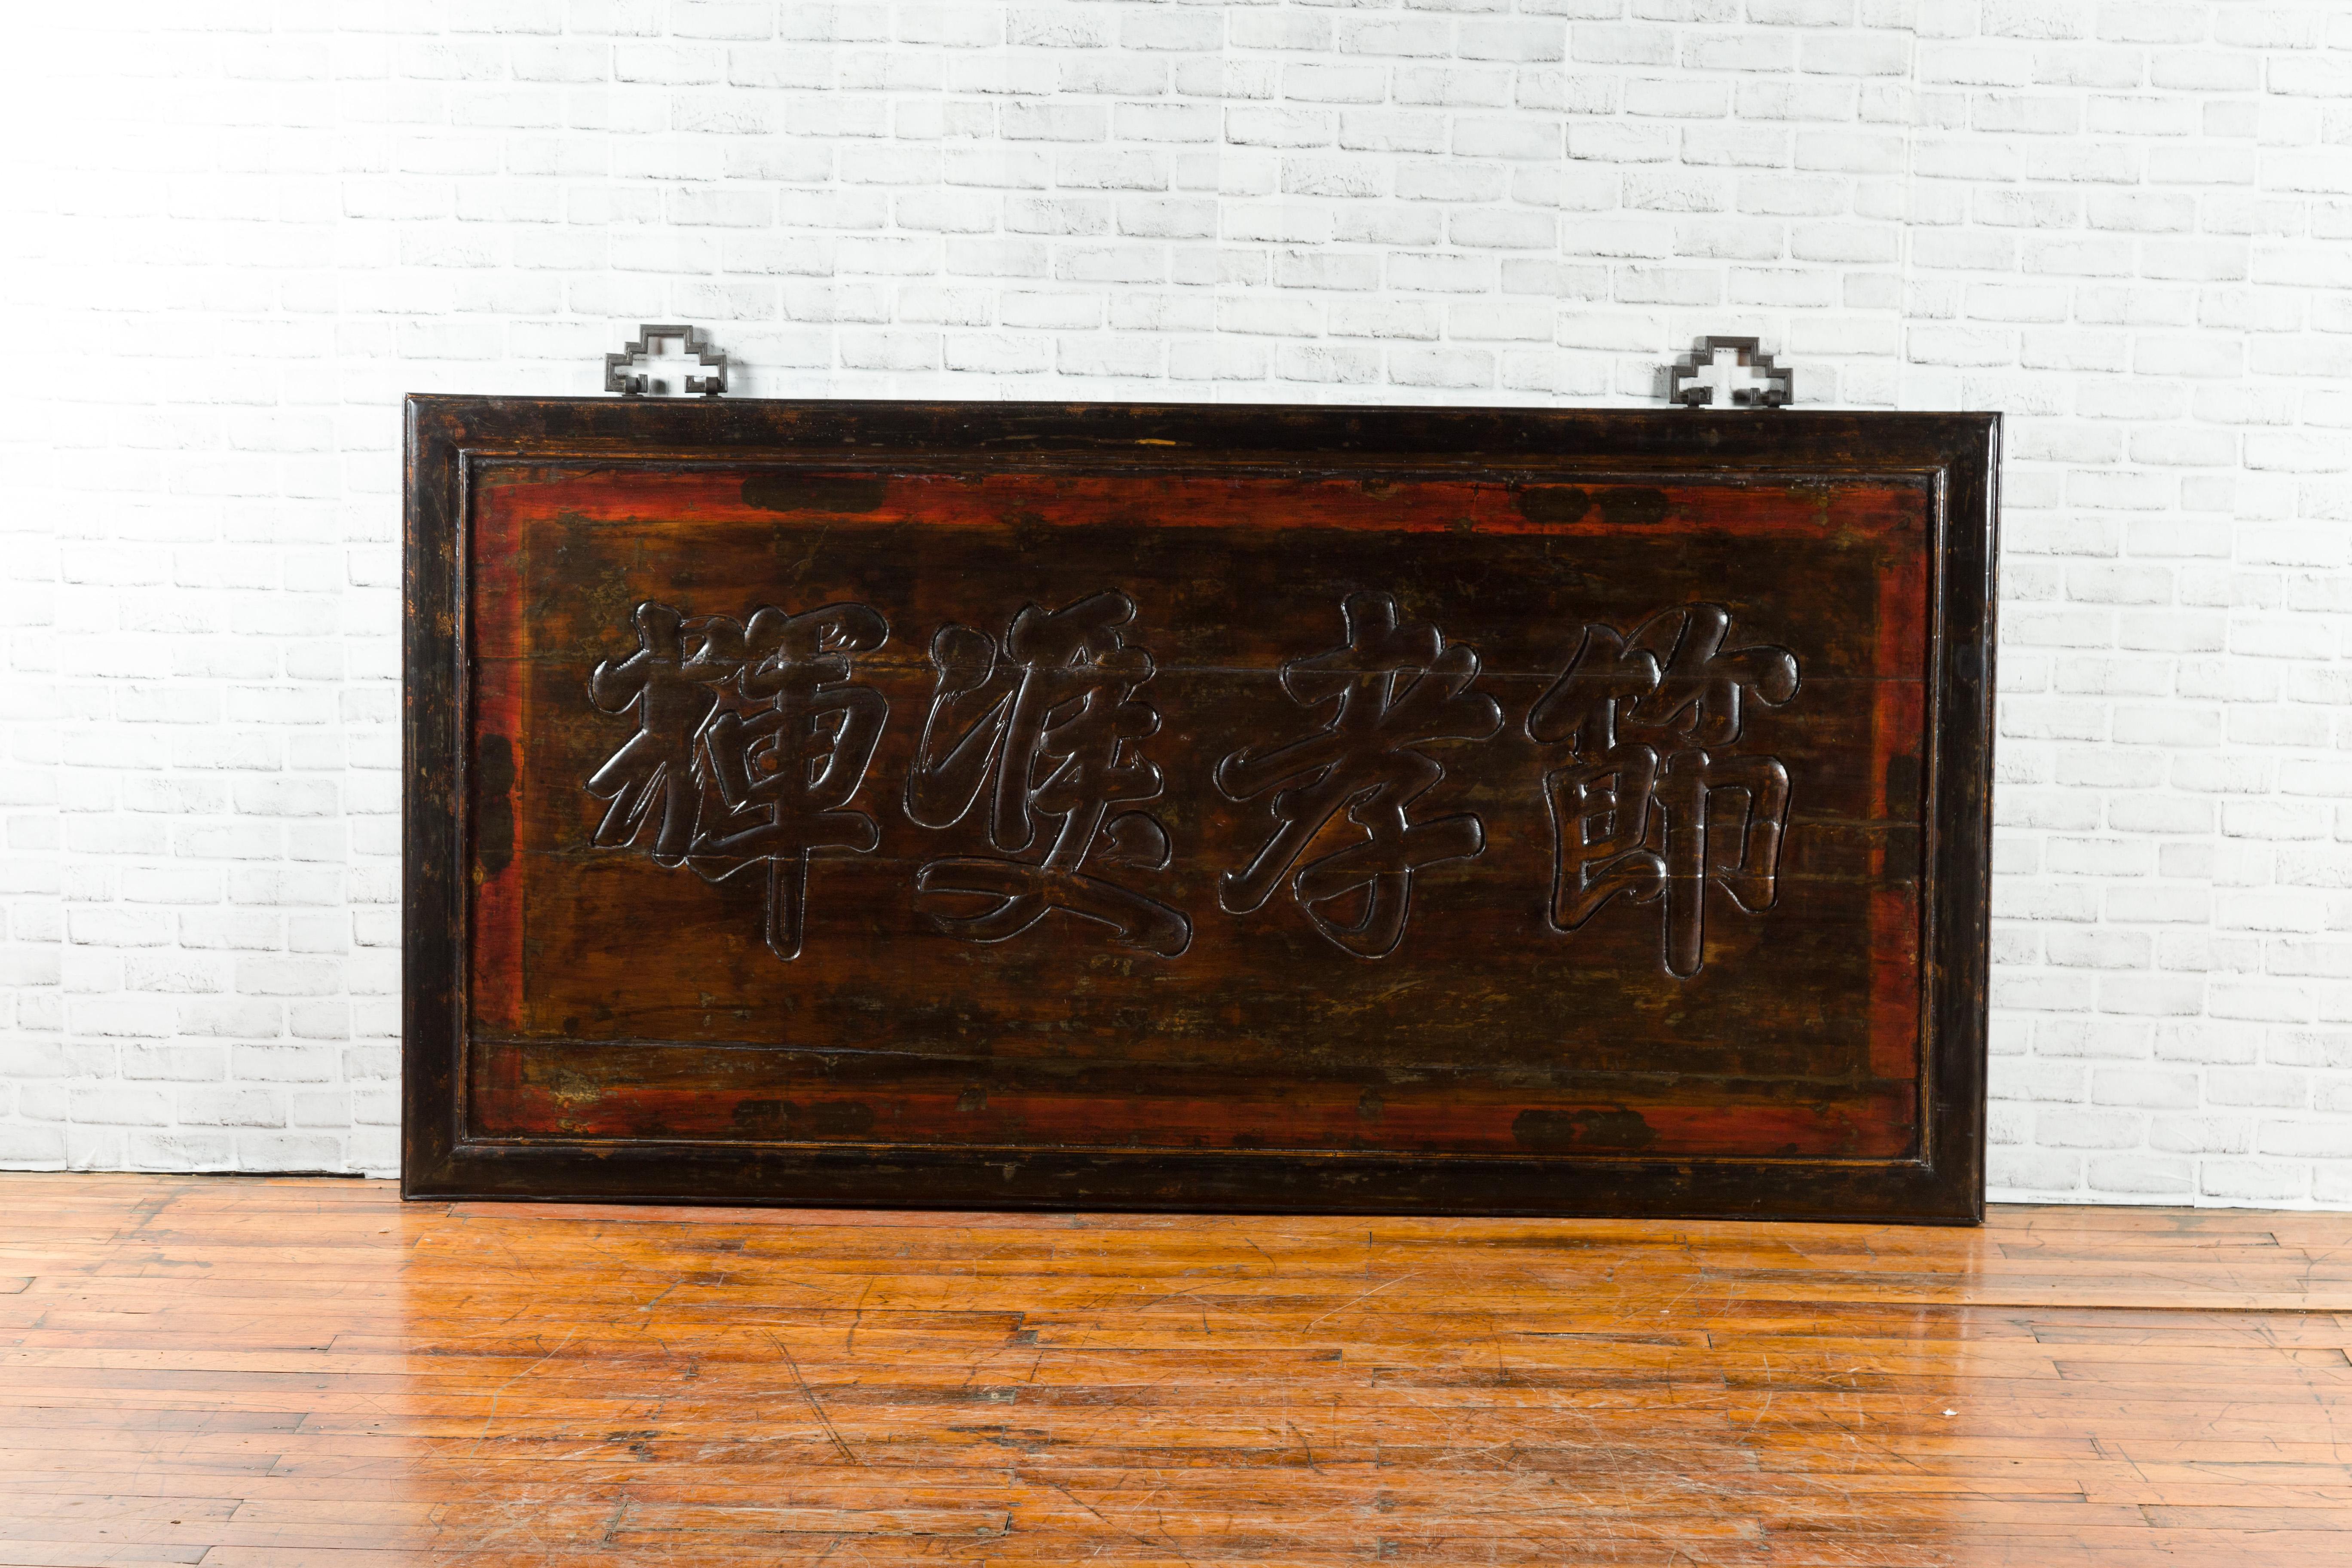 A large Chinese hand carved shop sign from the early 20th century, with calligraphy. Created in China during the early years of the 20th century, this shop sign features Chinese characters carved in low-relief. The panel is lacquered with a dark